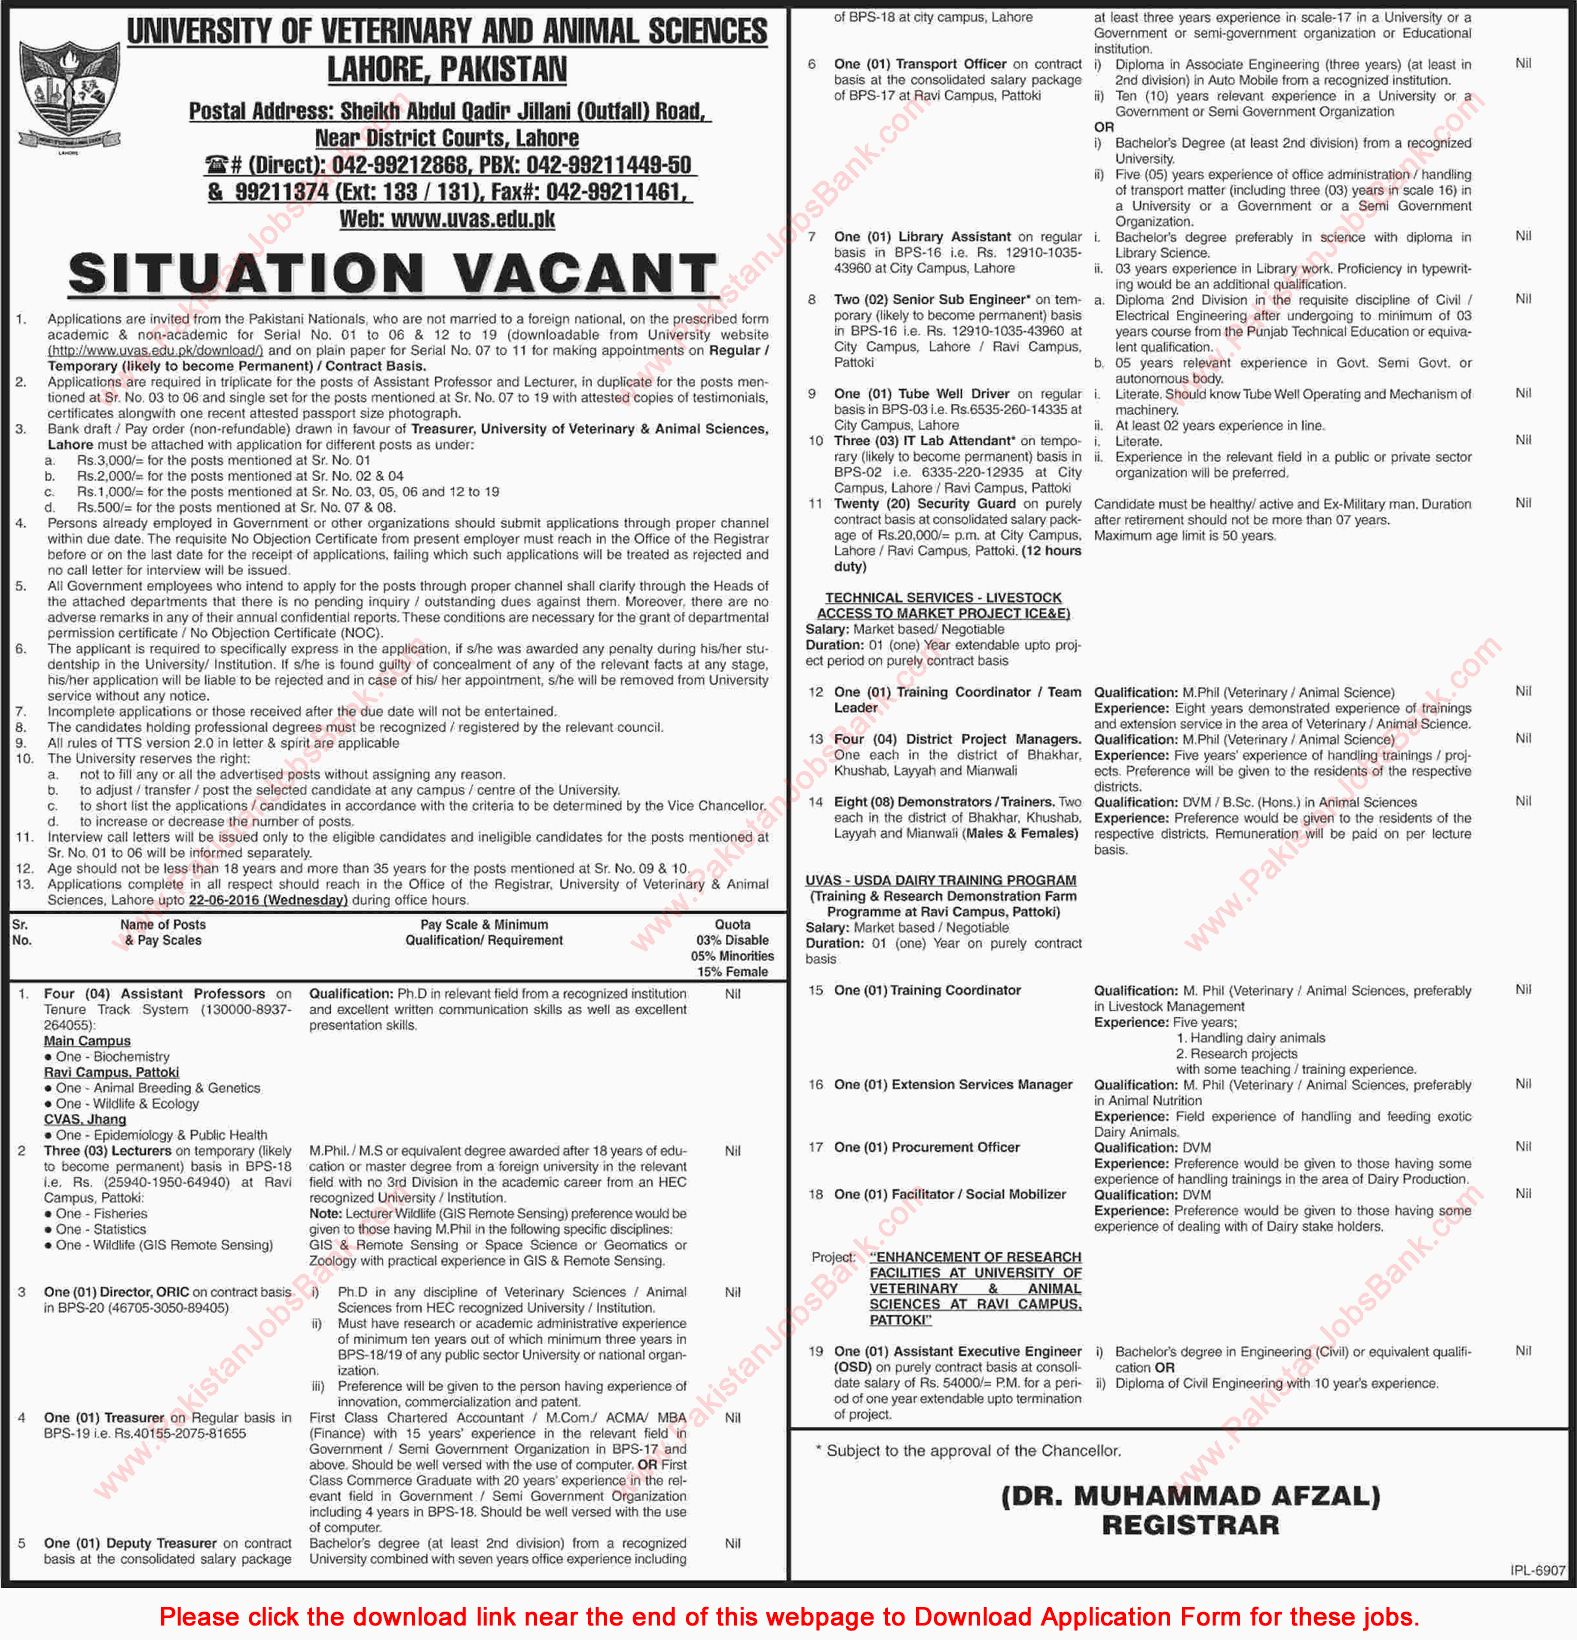 University of Veterinary and Animal Sciences Lahore Jobs June 2016 UVAS Application Form Download Latest